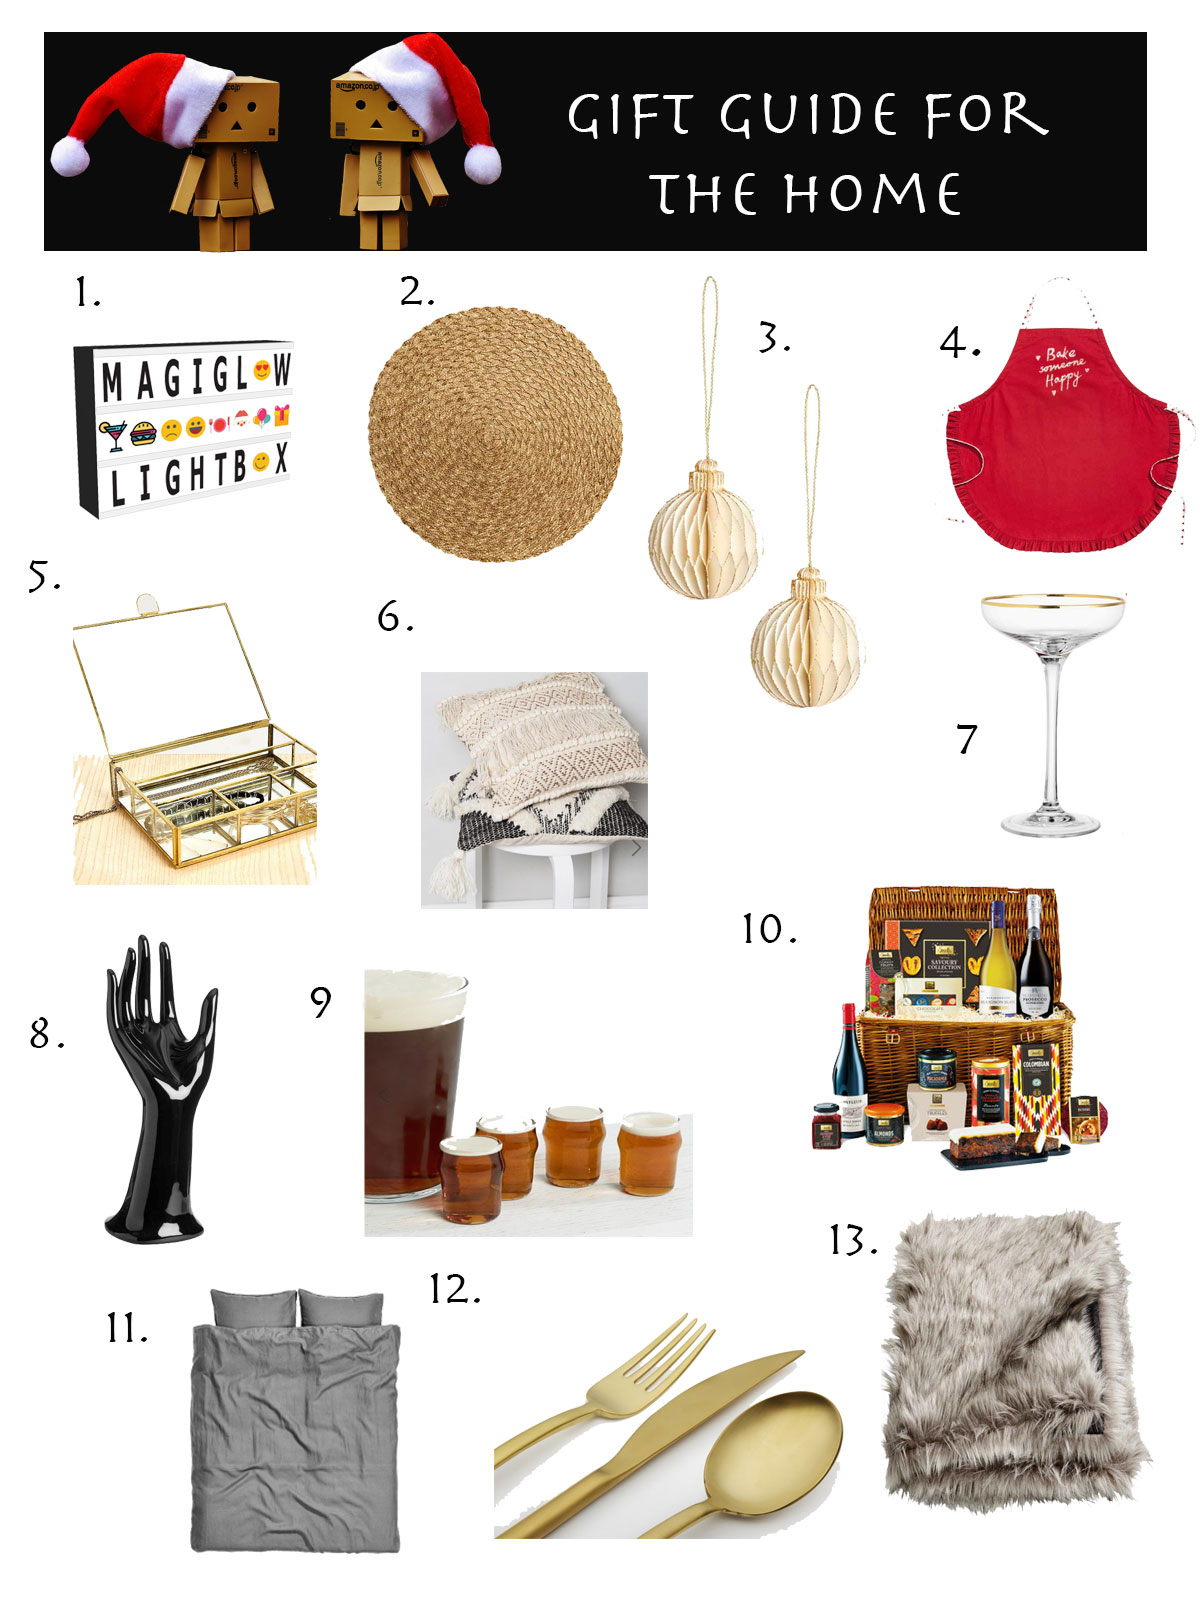 Gift Guide for the home - Holiday Gift Guide for the Home